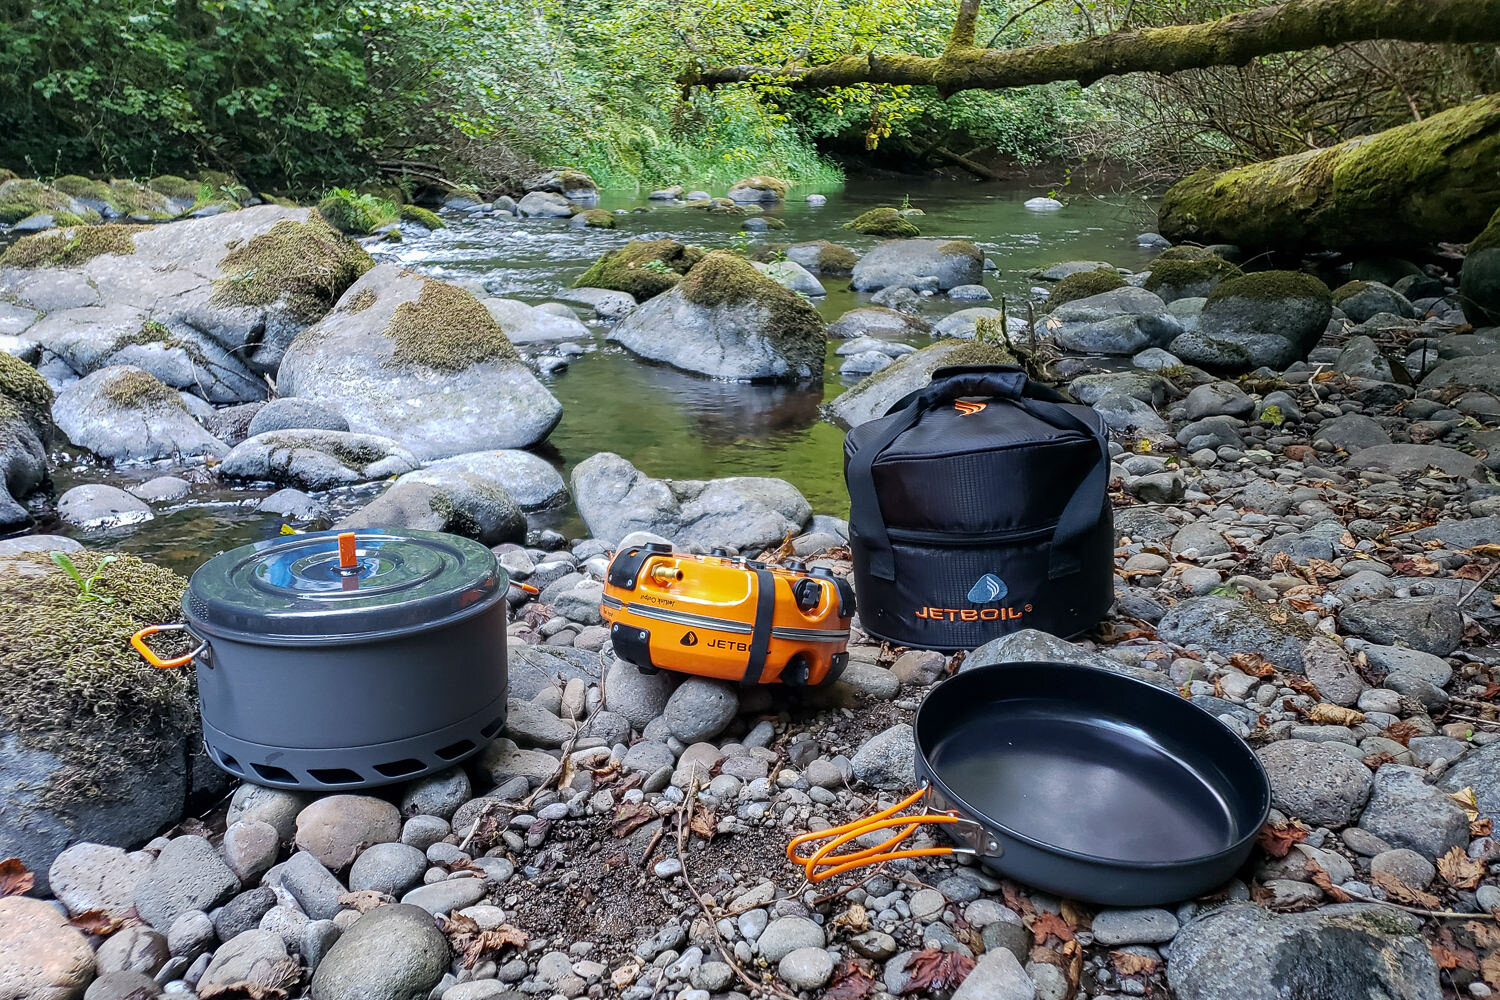 The Jetboil Genesis Basecamp System features large-volume cookware & a super compact stove that nests inside